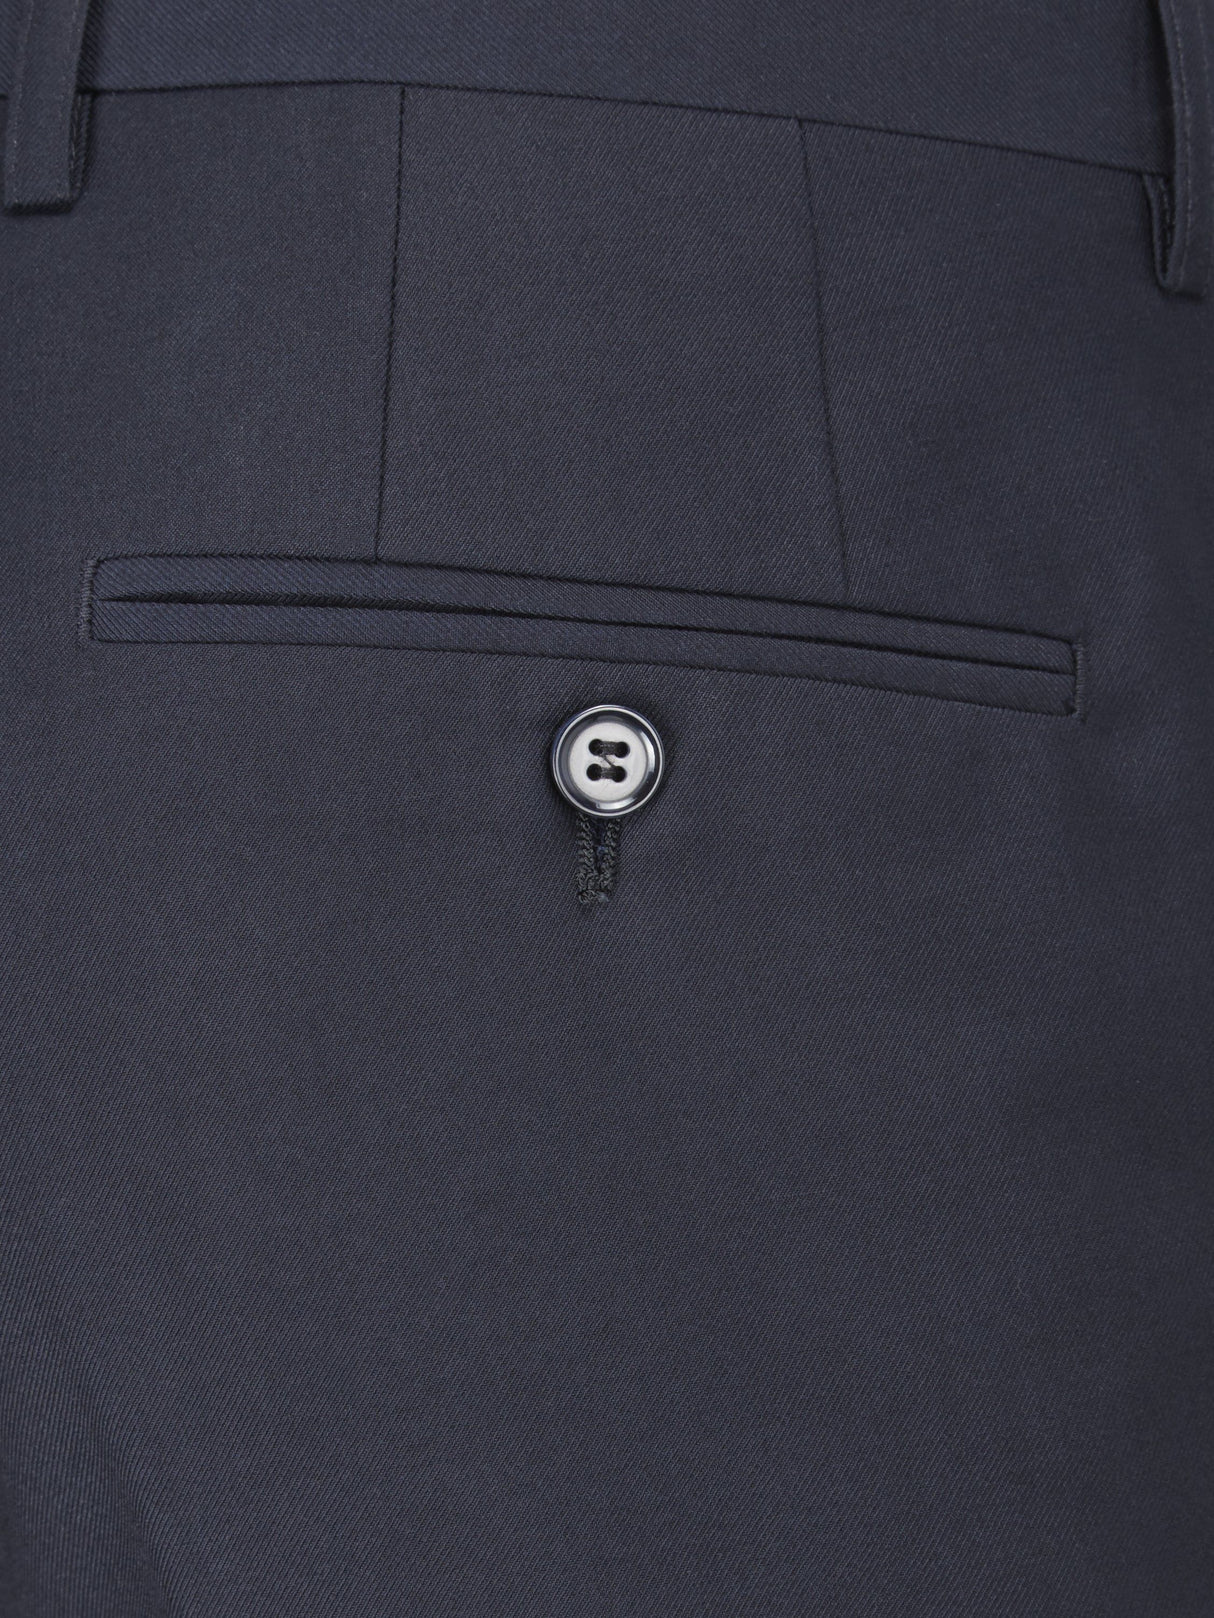 Skopes Madrid X-Tall Navy Suit Trousers Navy